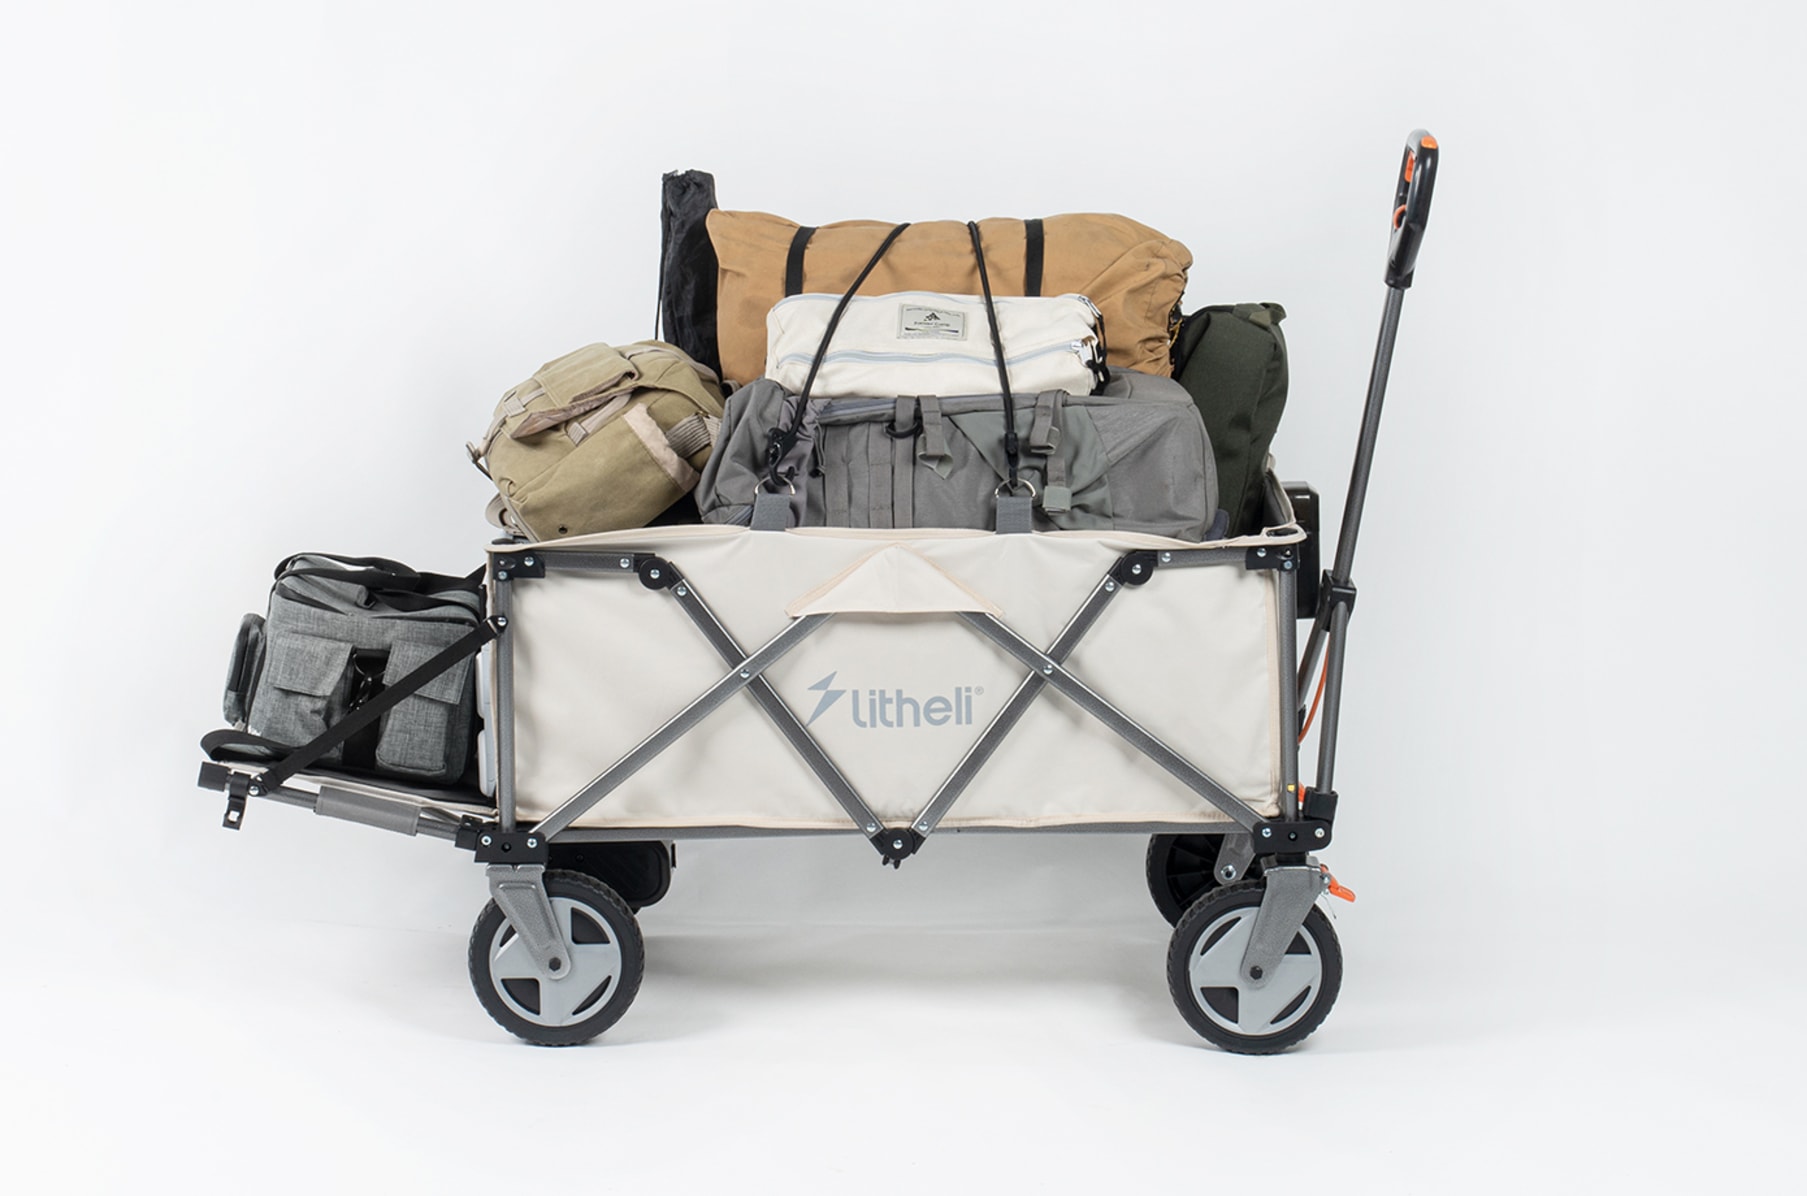 Litheli Electric Utility Wagon - Powered Cart with Foldable Design